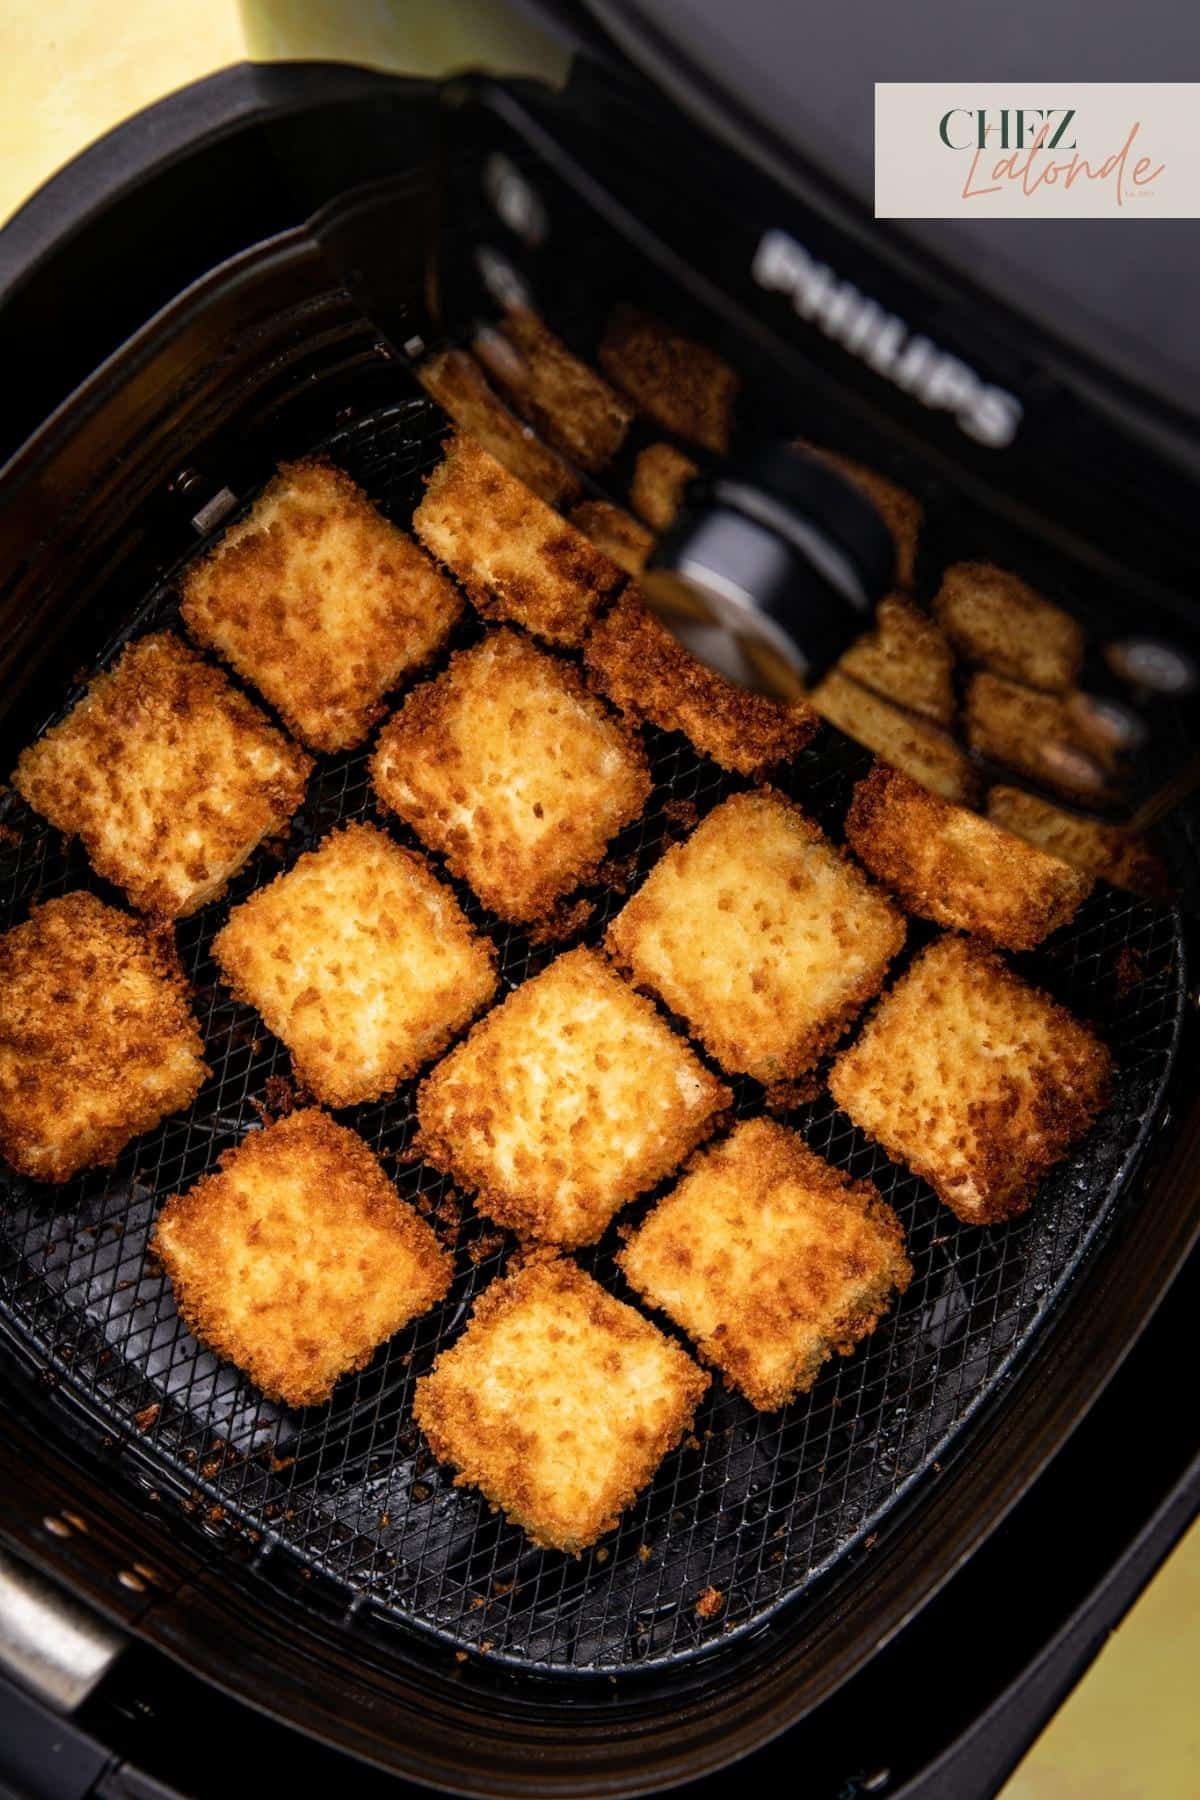 Tofu done cooking in the air fryer after 20 minutes.  